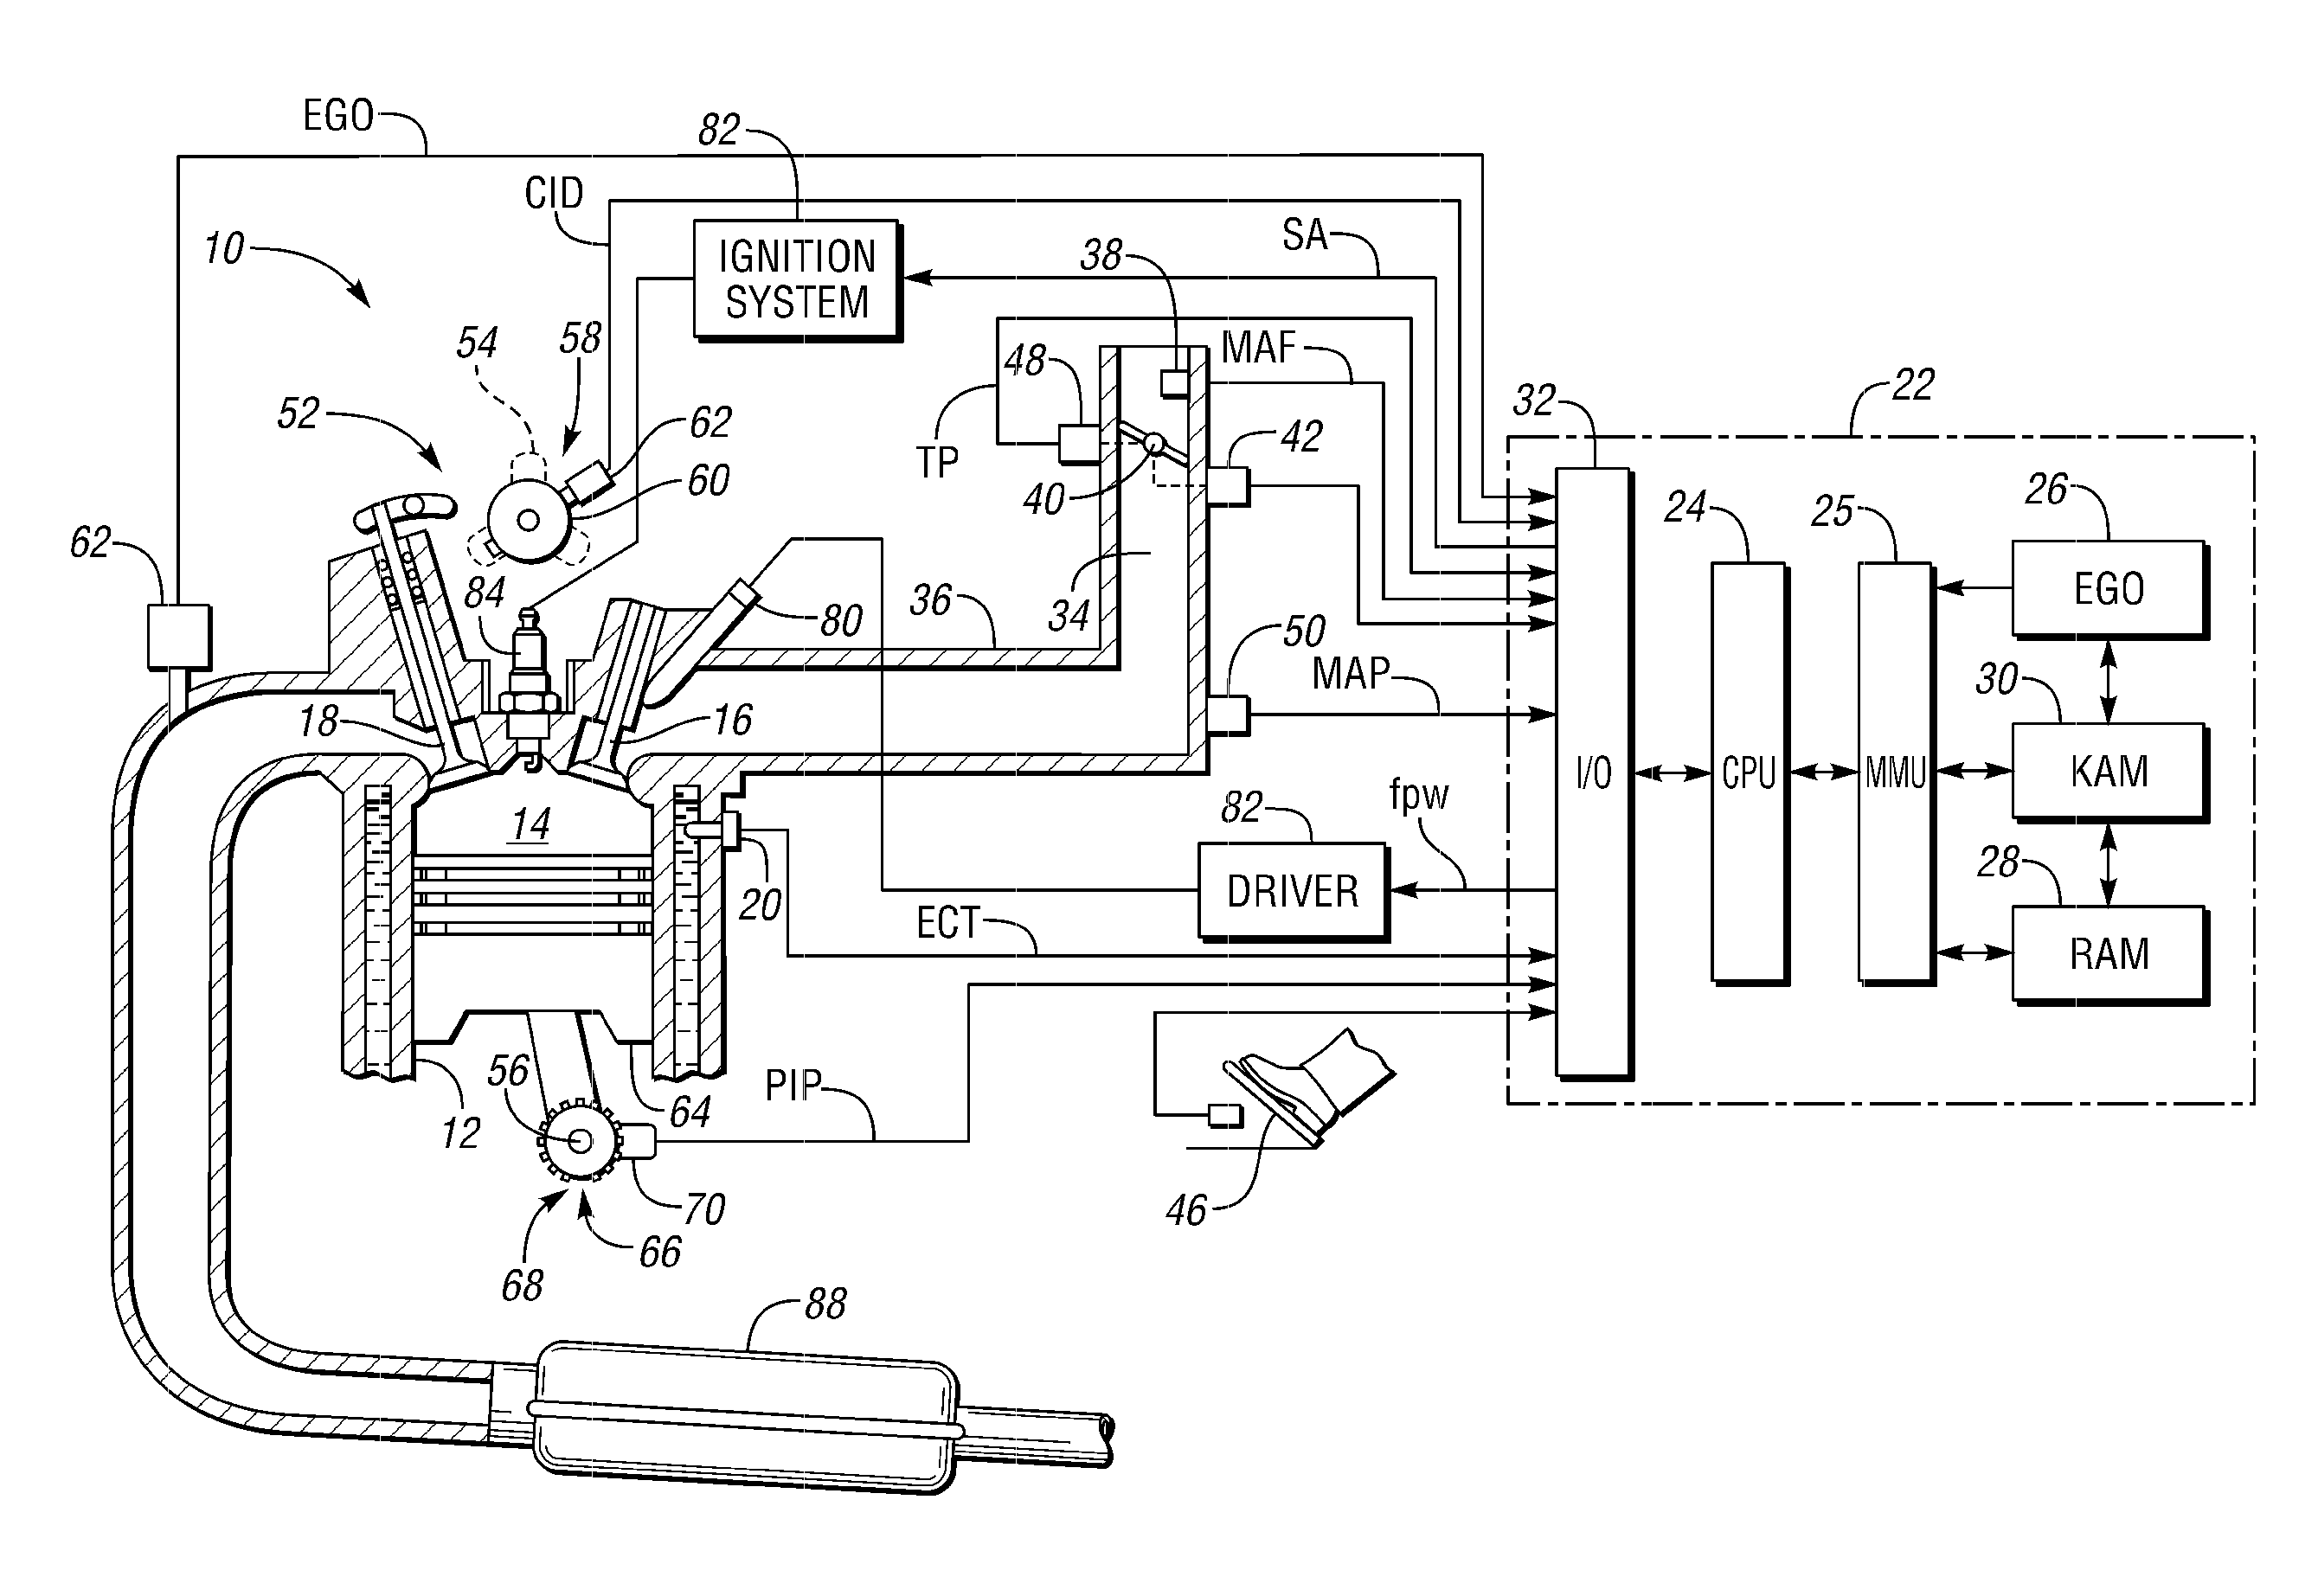 Engine Control with Valve Operation Monitoring Using Camshaft Position Sensing